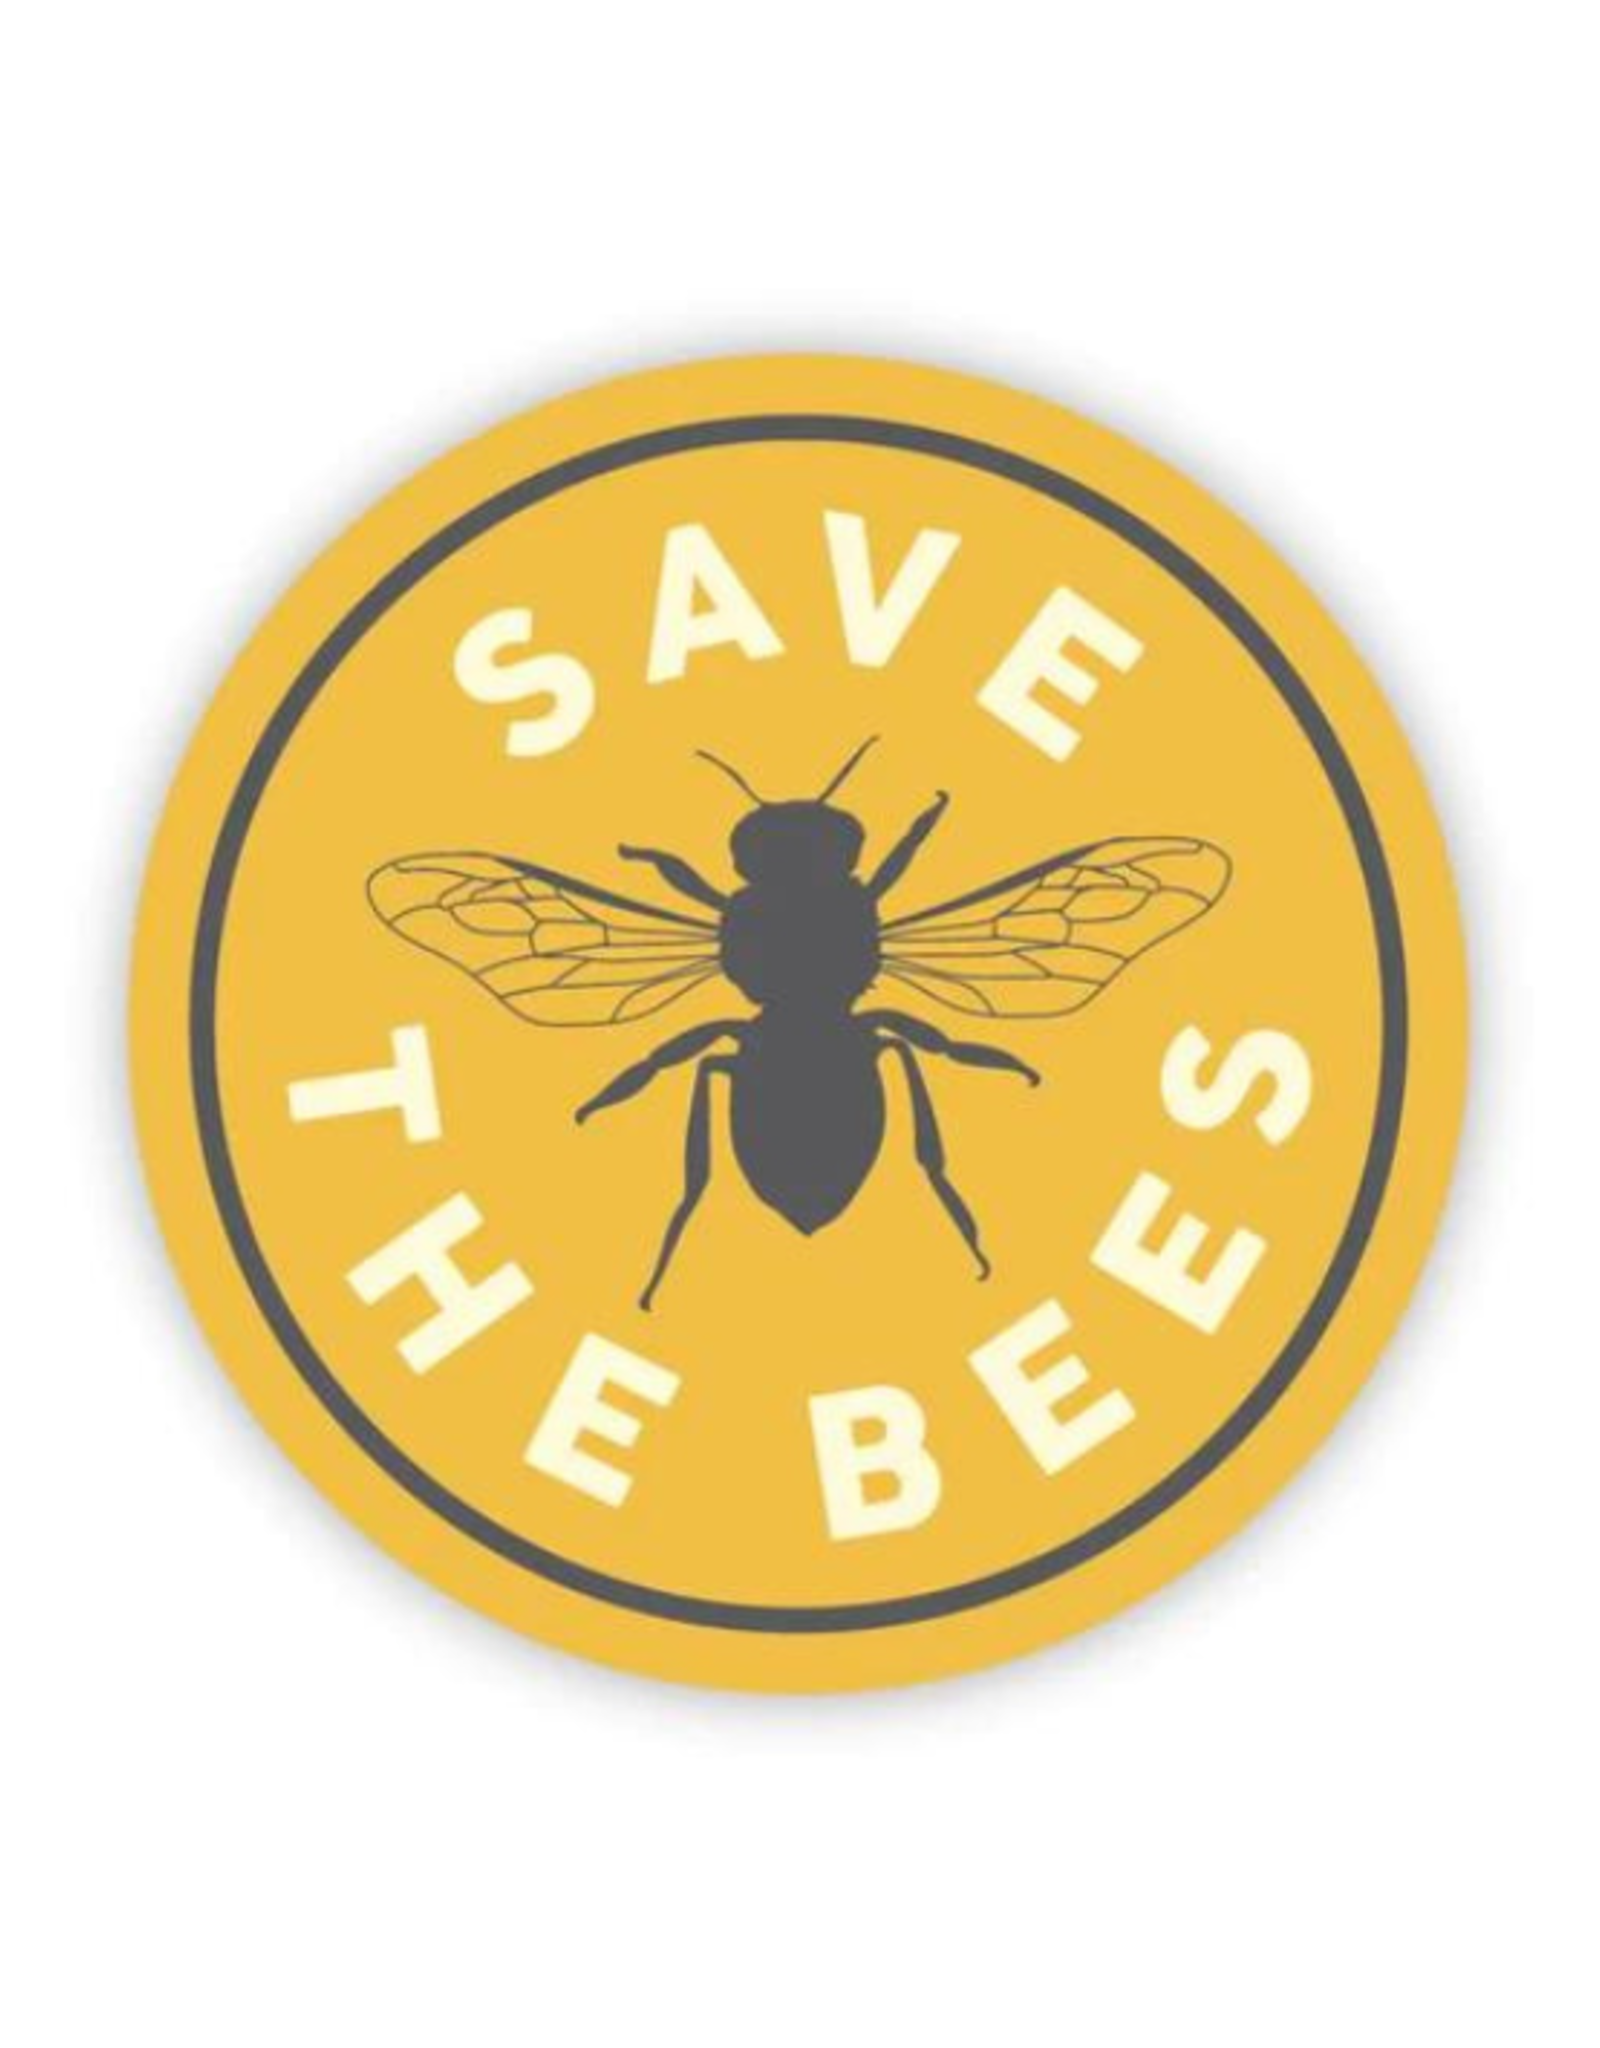 Stickers Northwest Inc. Stickers Northwest Inc - Save the Bees Sticker